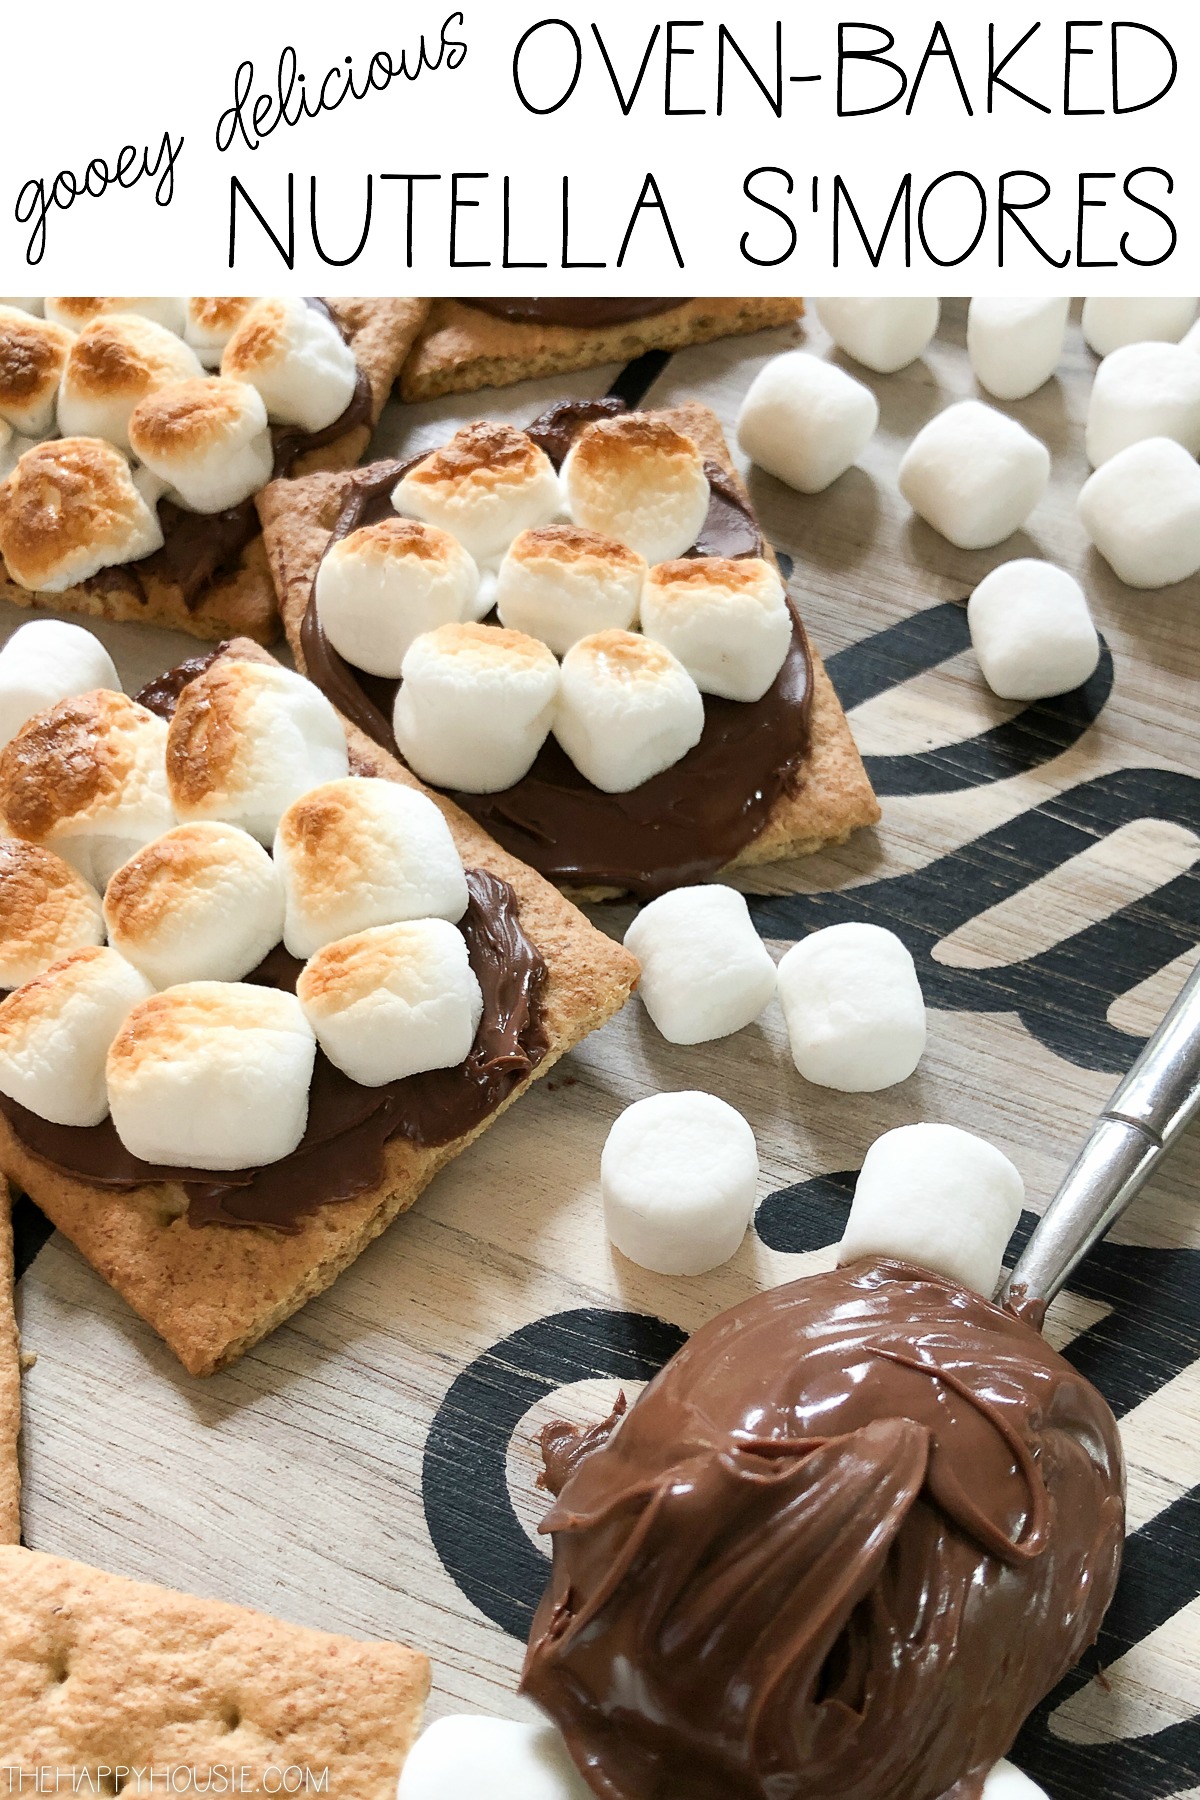 Oven baked Nutella s'mores graphic.